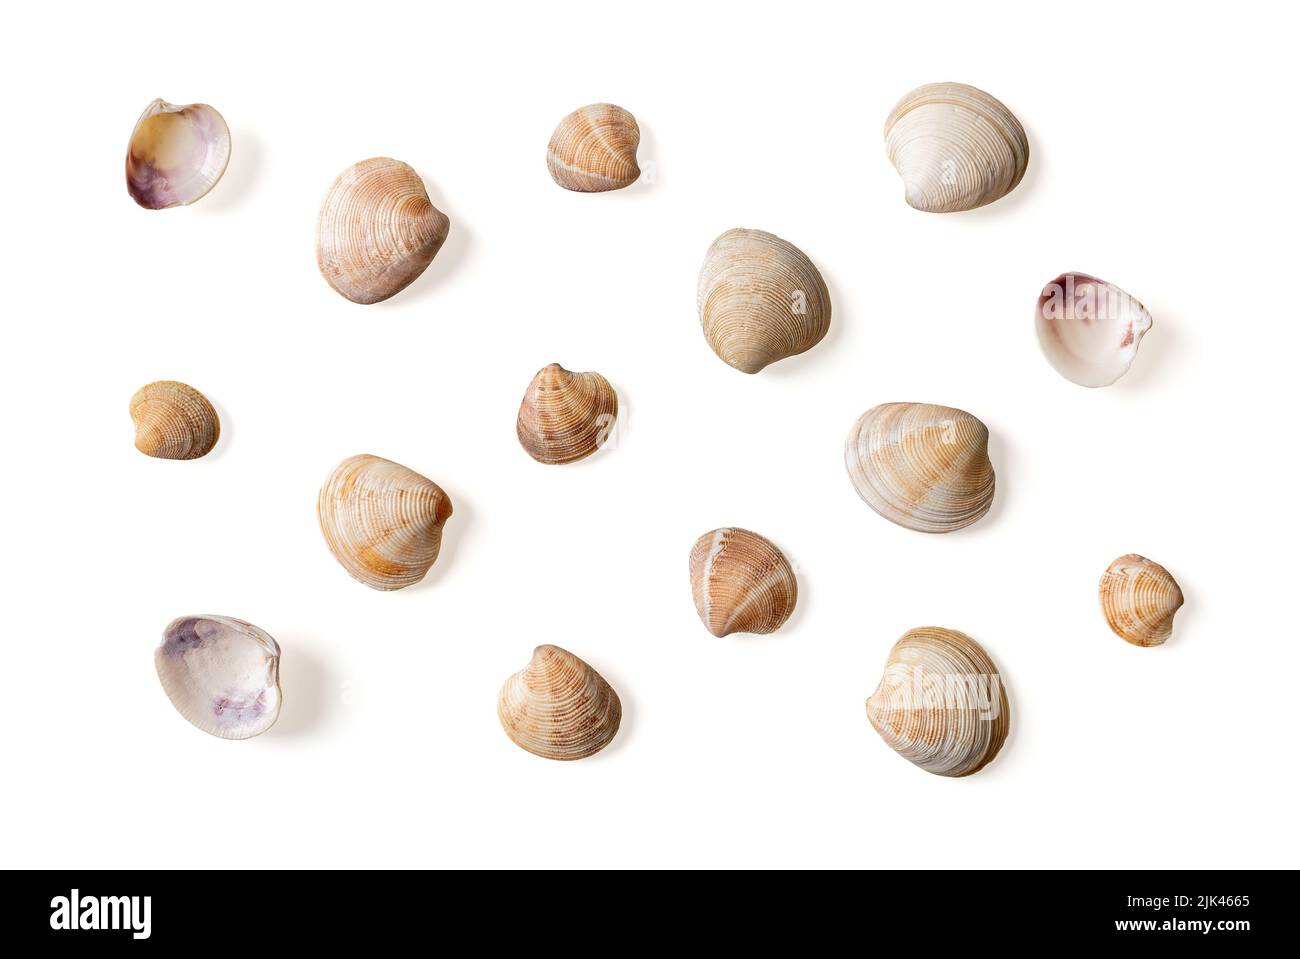 Set of Venus clam empty shells isolated on white background. Variety of Veneridae bivalve multicolored shells macro. Saltwater clams, seafood concept. Stock Photo